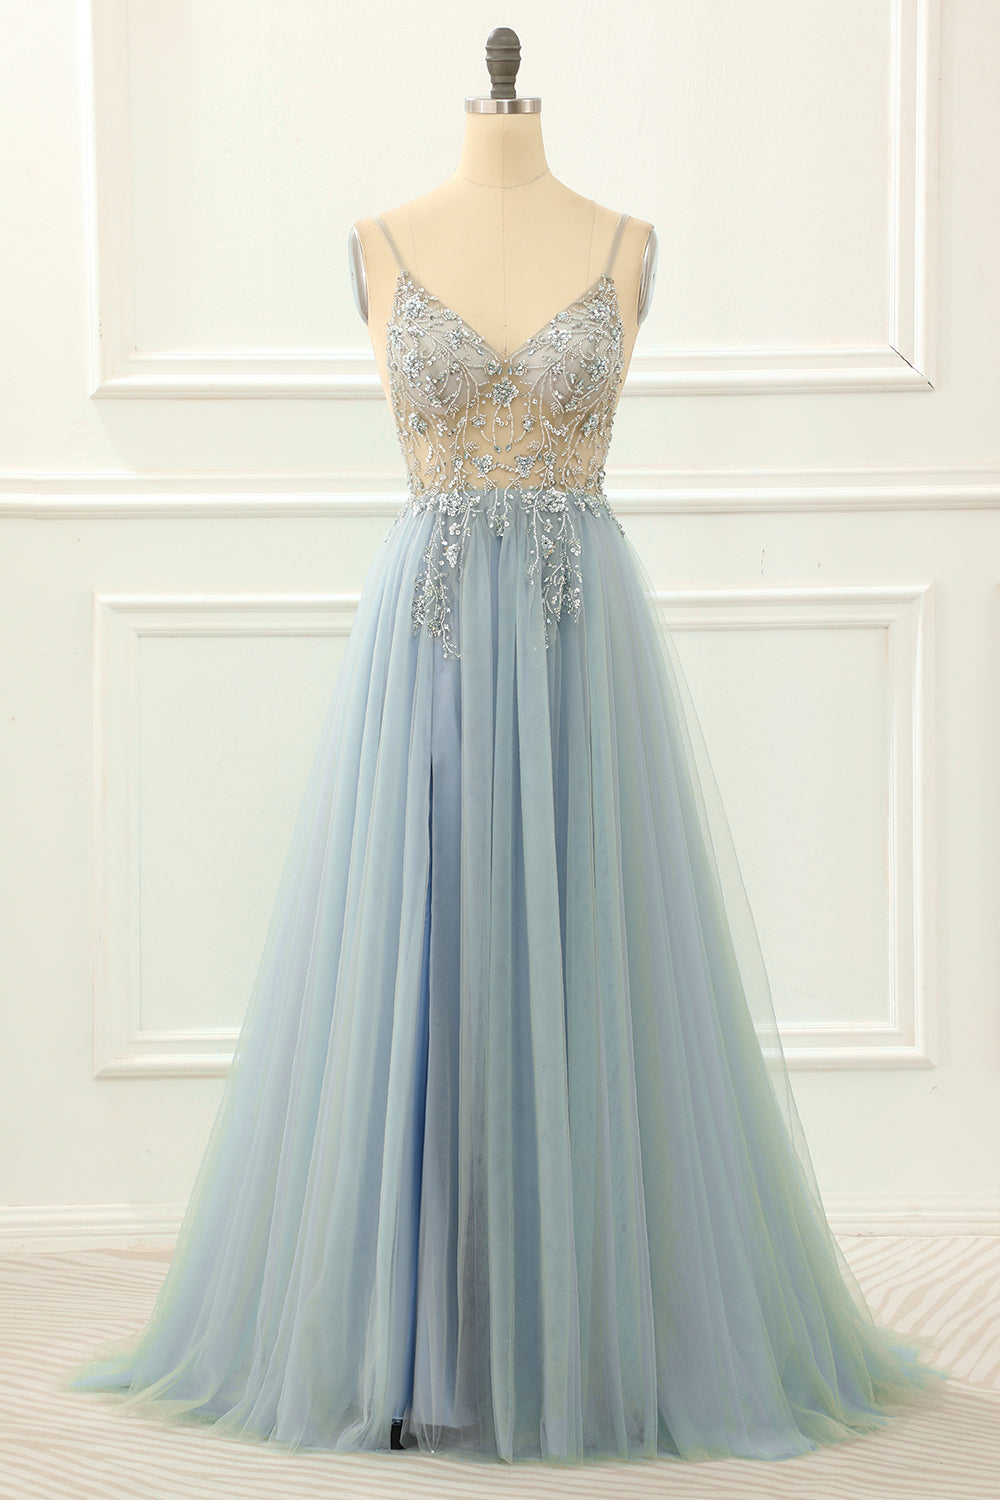 Bridesmaids Dresses Blush Pink, Blue Beading Tulle A Line Sparkly Prom Dress